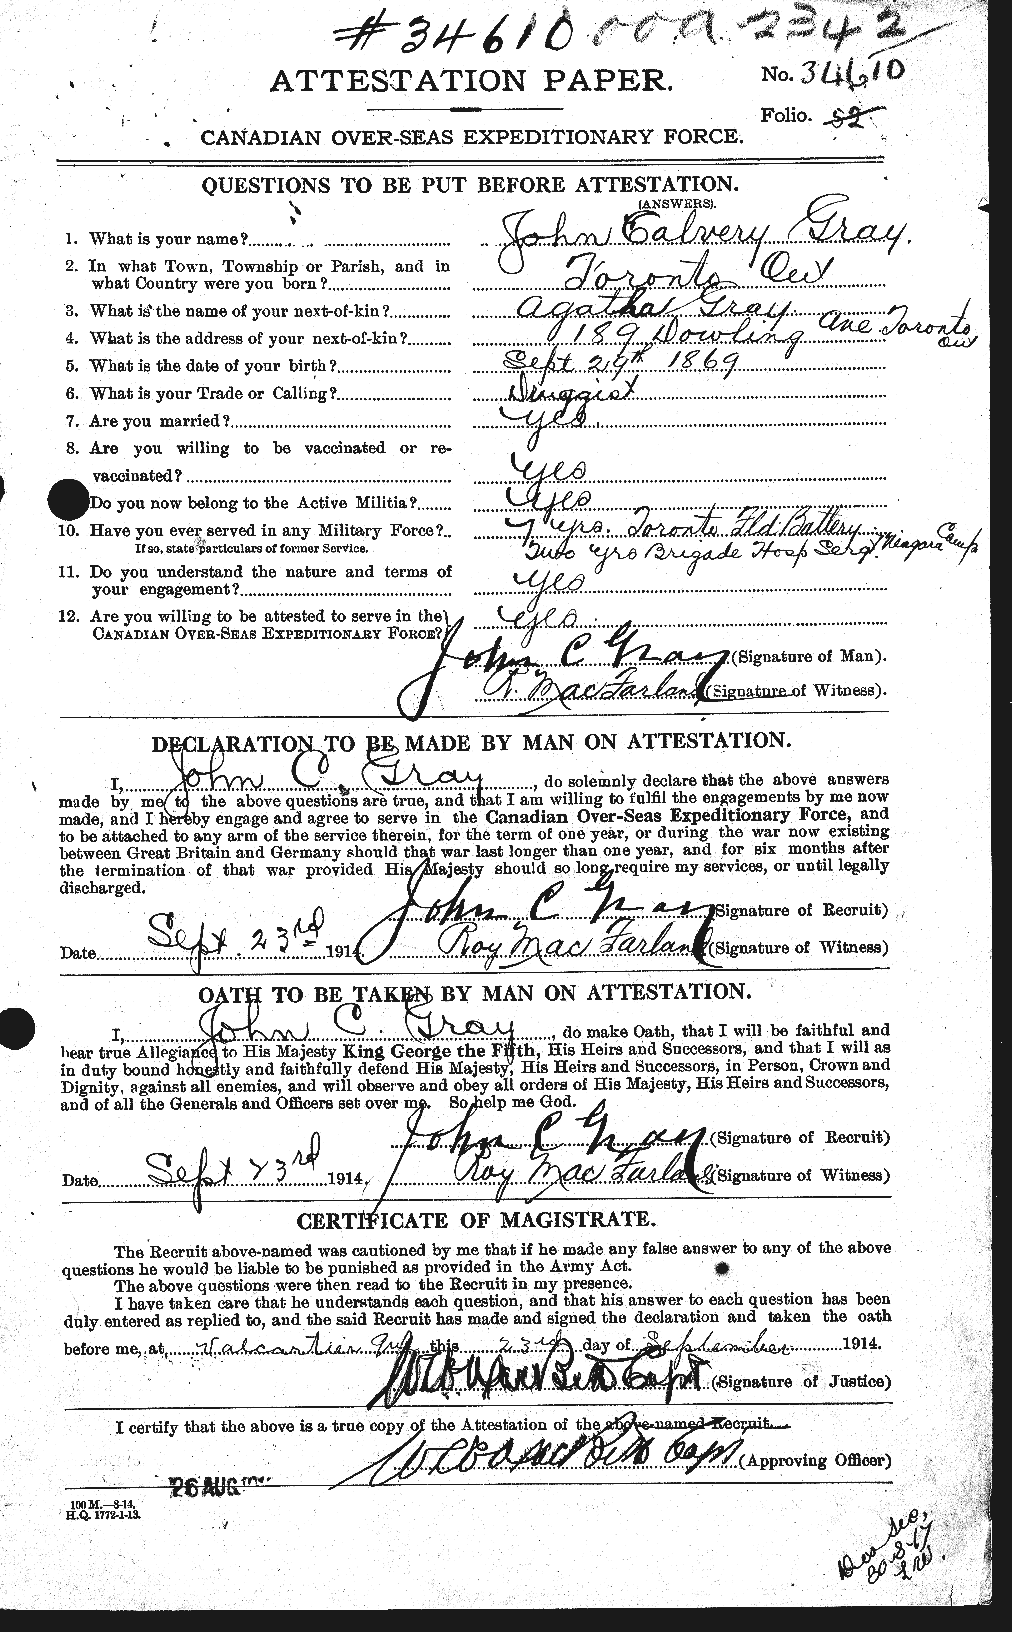 Personnel Records of the First World War - CEF 363359a